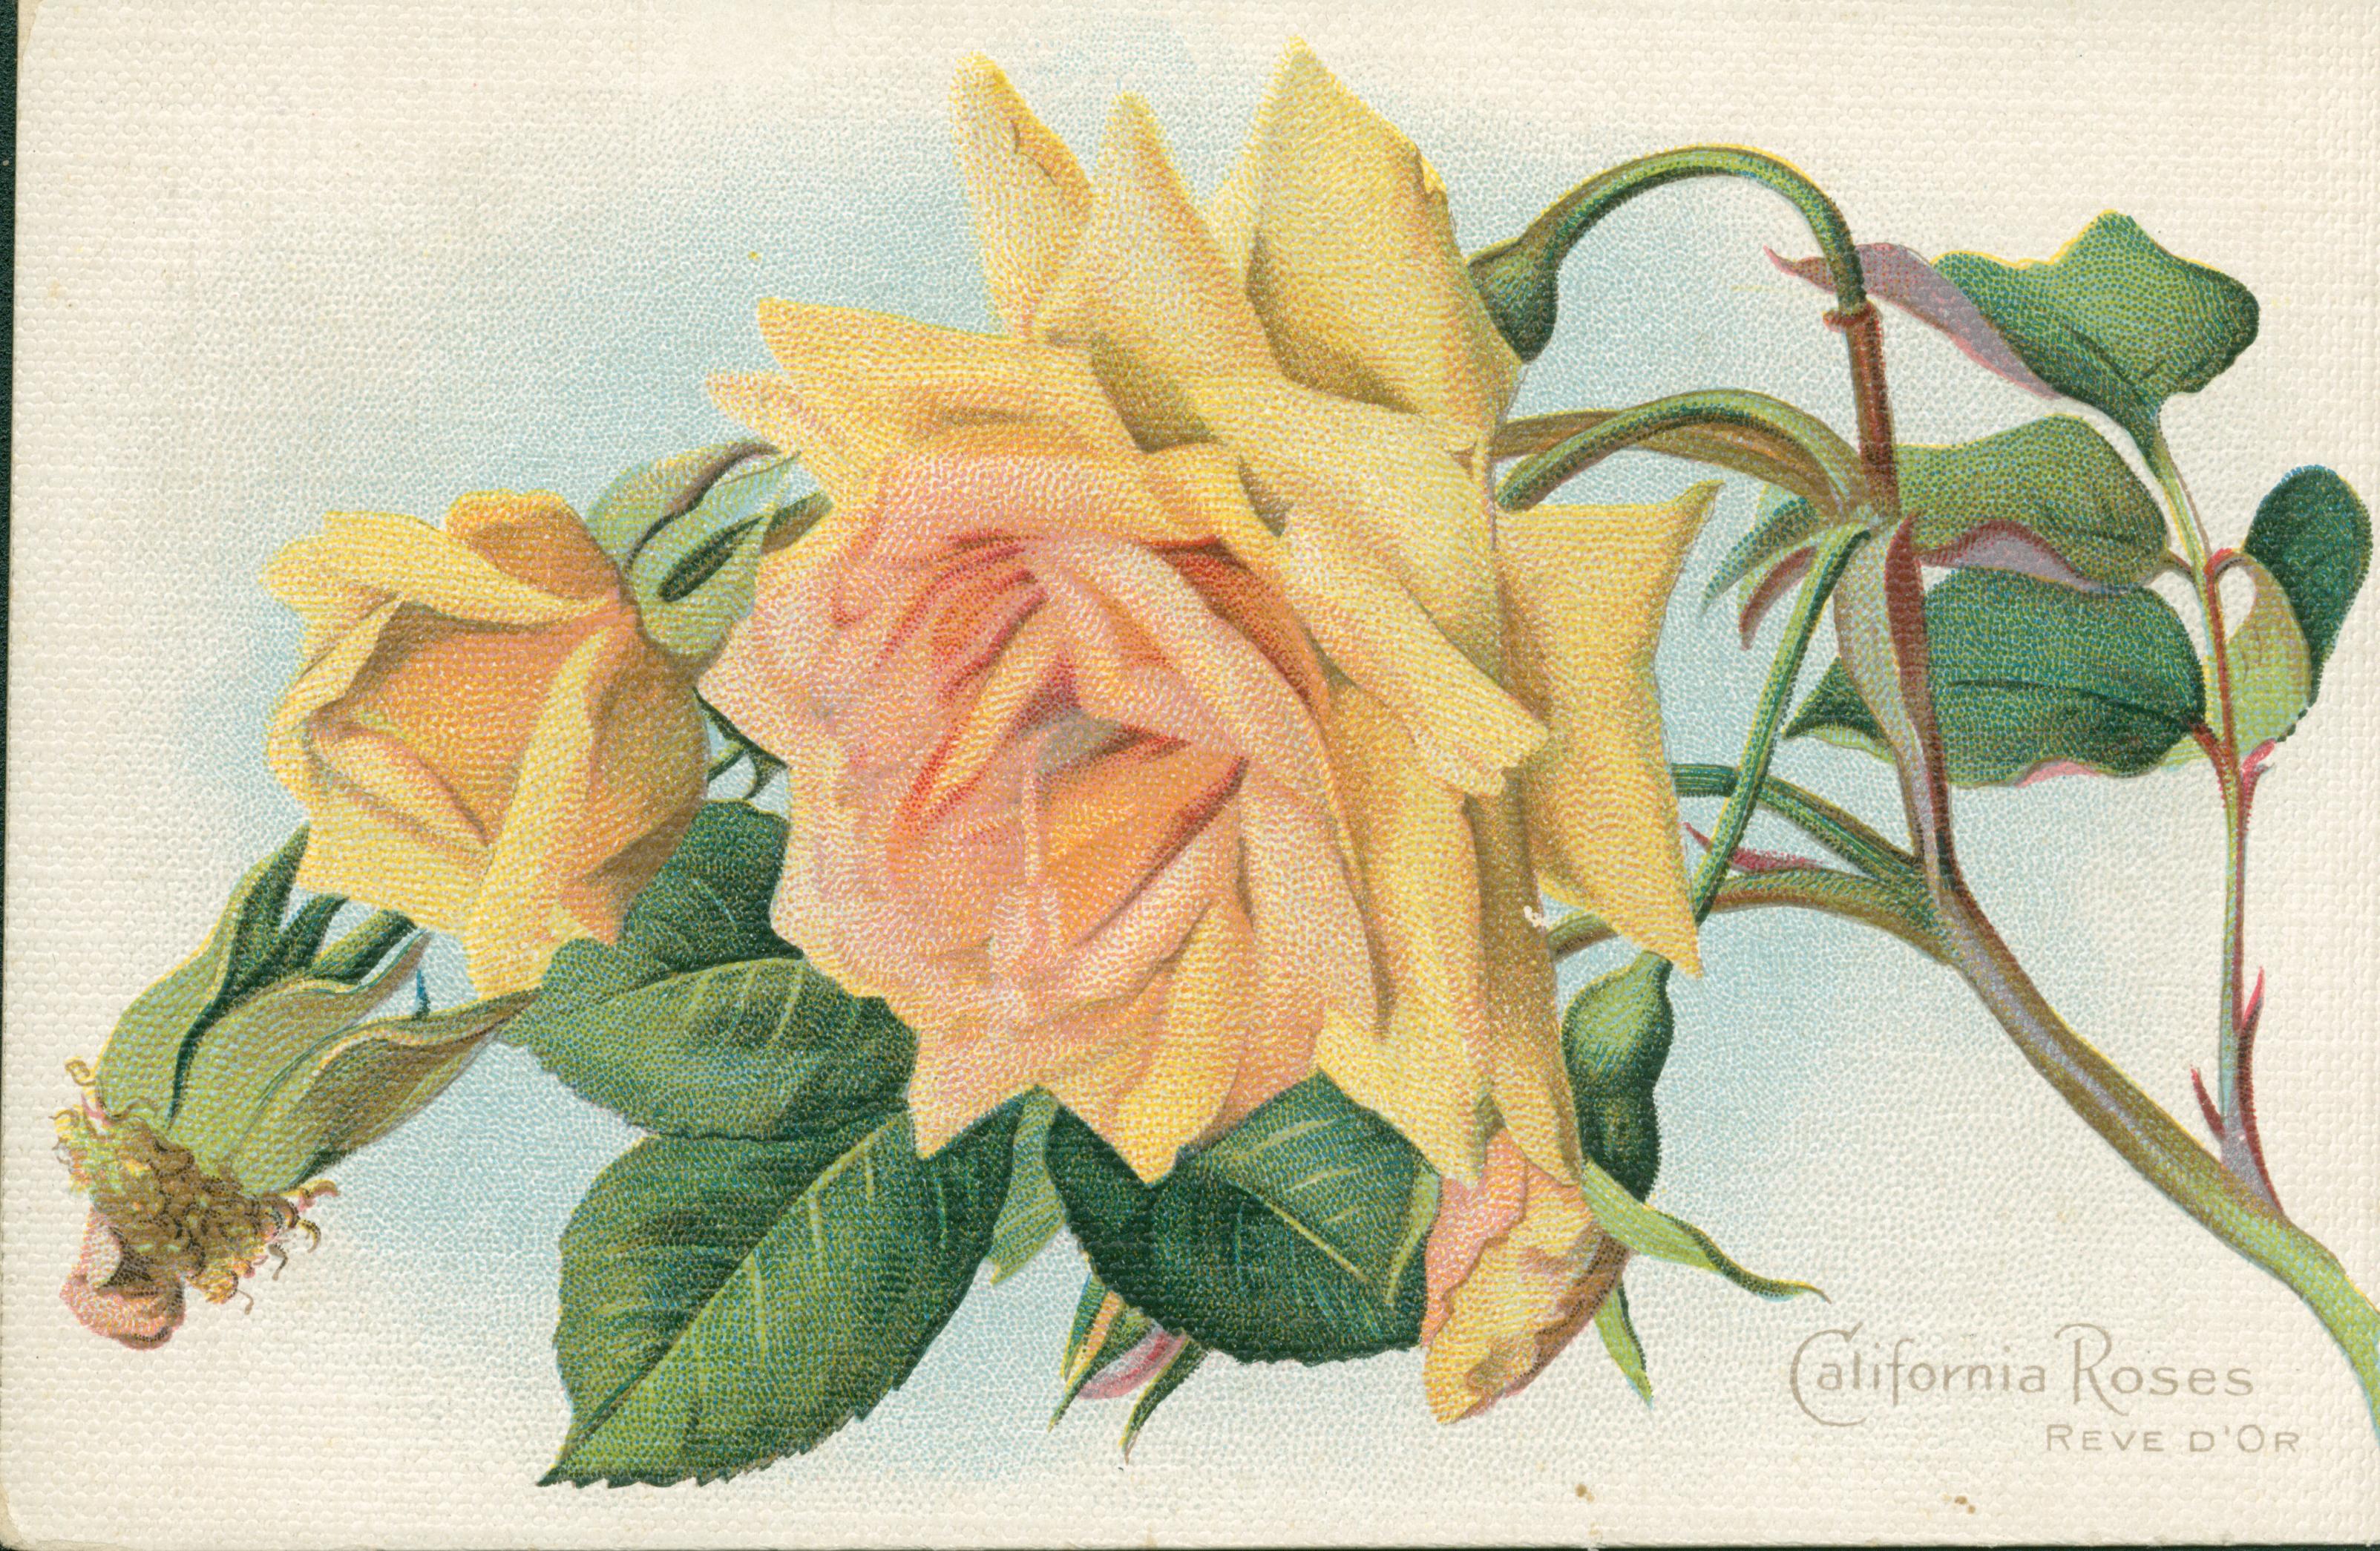 Shows a sprig of four yellow roses in various states of bloom